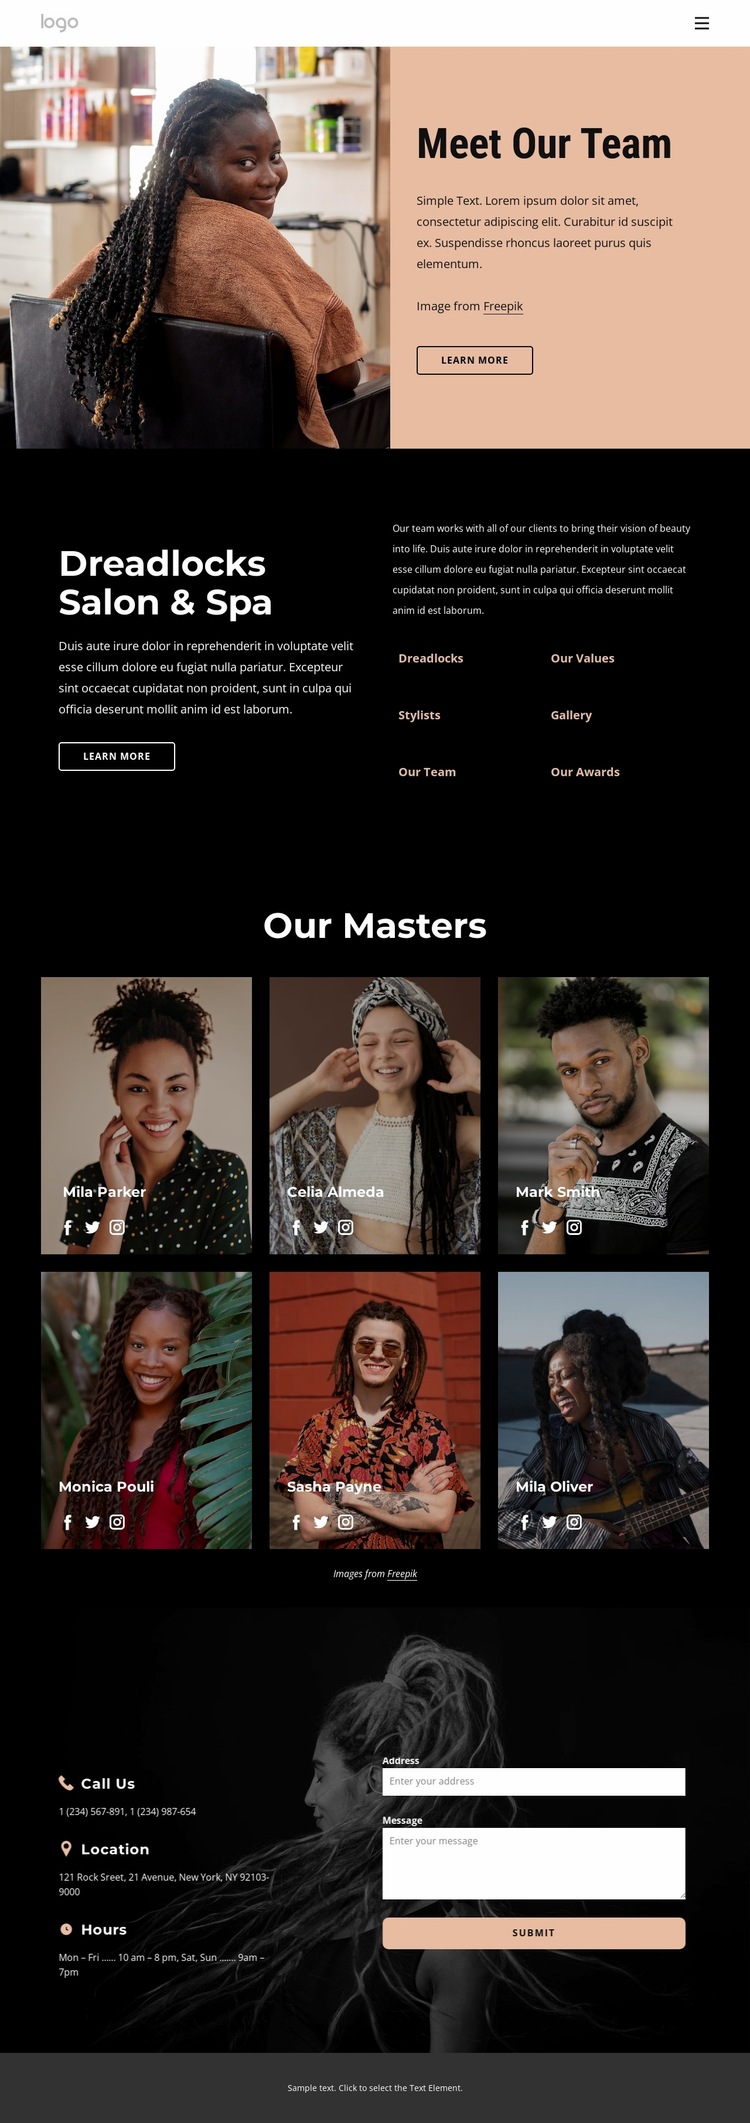 Meet our masters Website Builder Templates